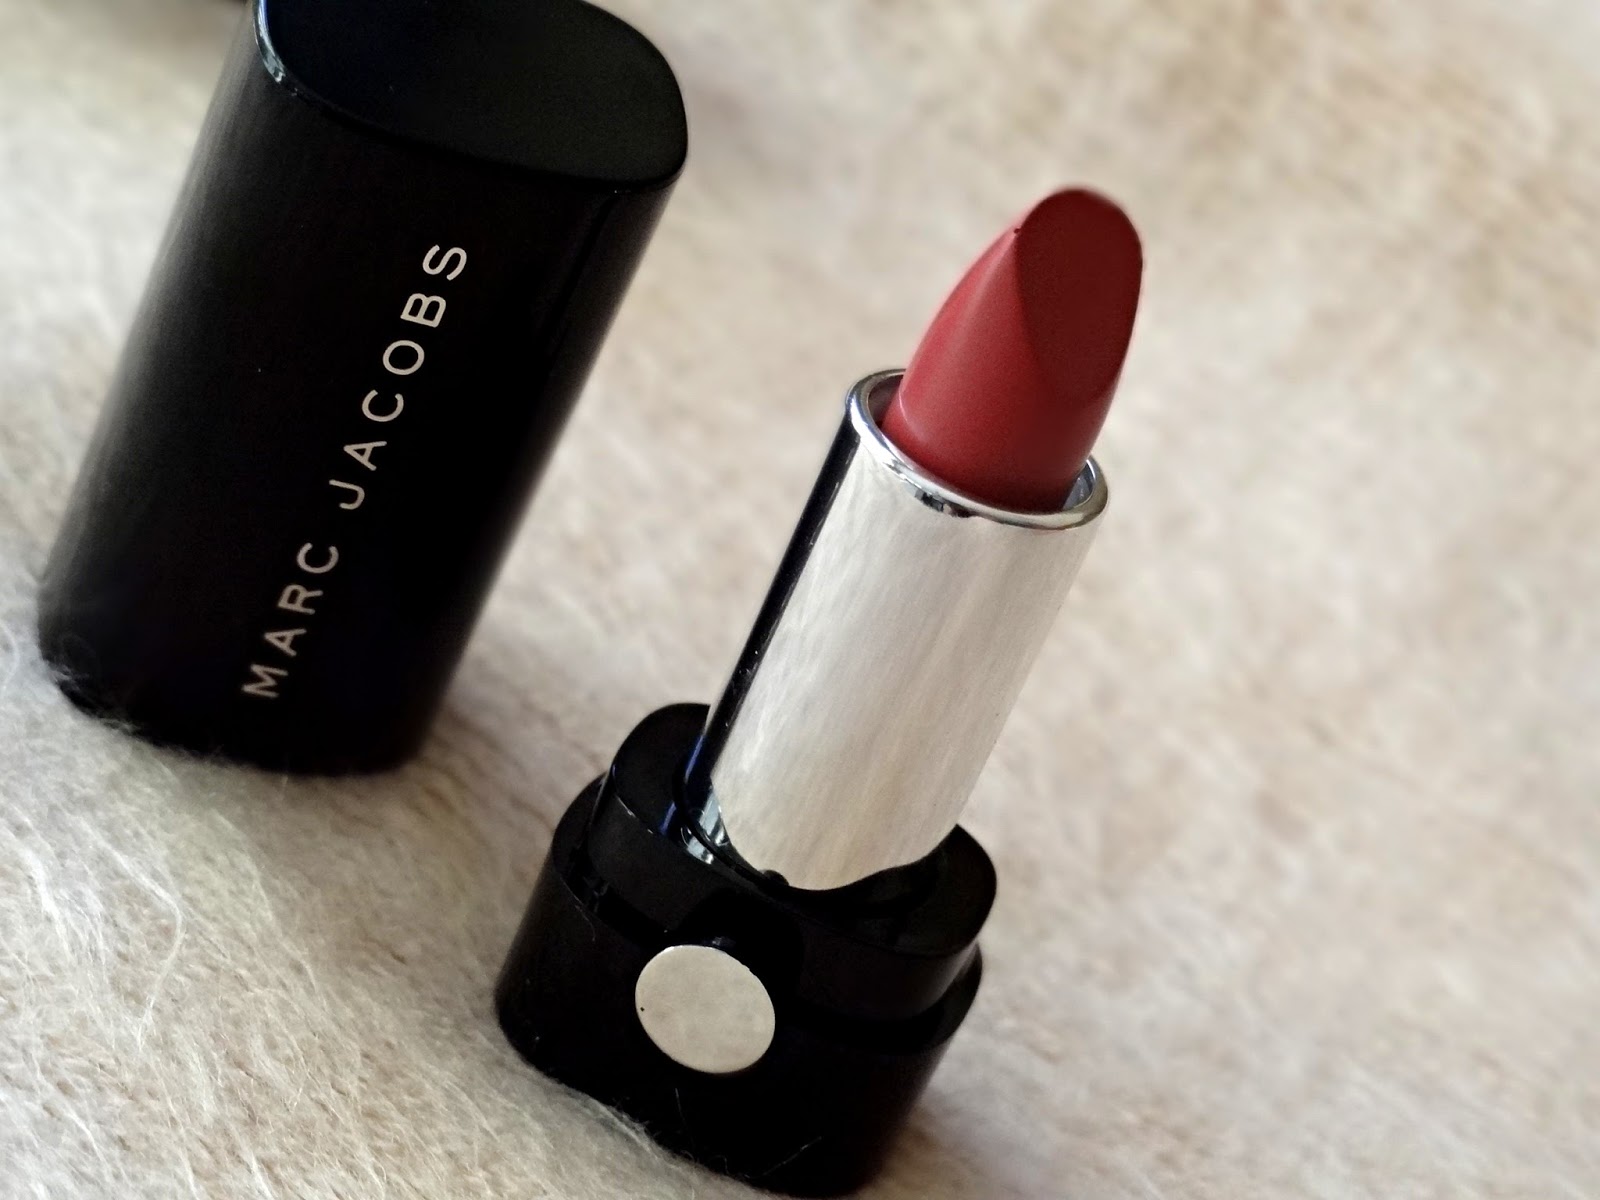 Marc Jacobs Beauty Le Marc Lip Creme in Kiss Kiss Bang Bang Review, Photos & Swatches